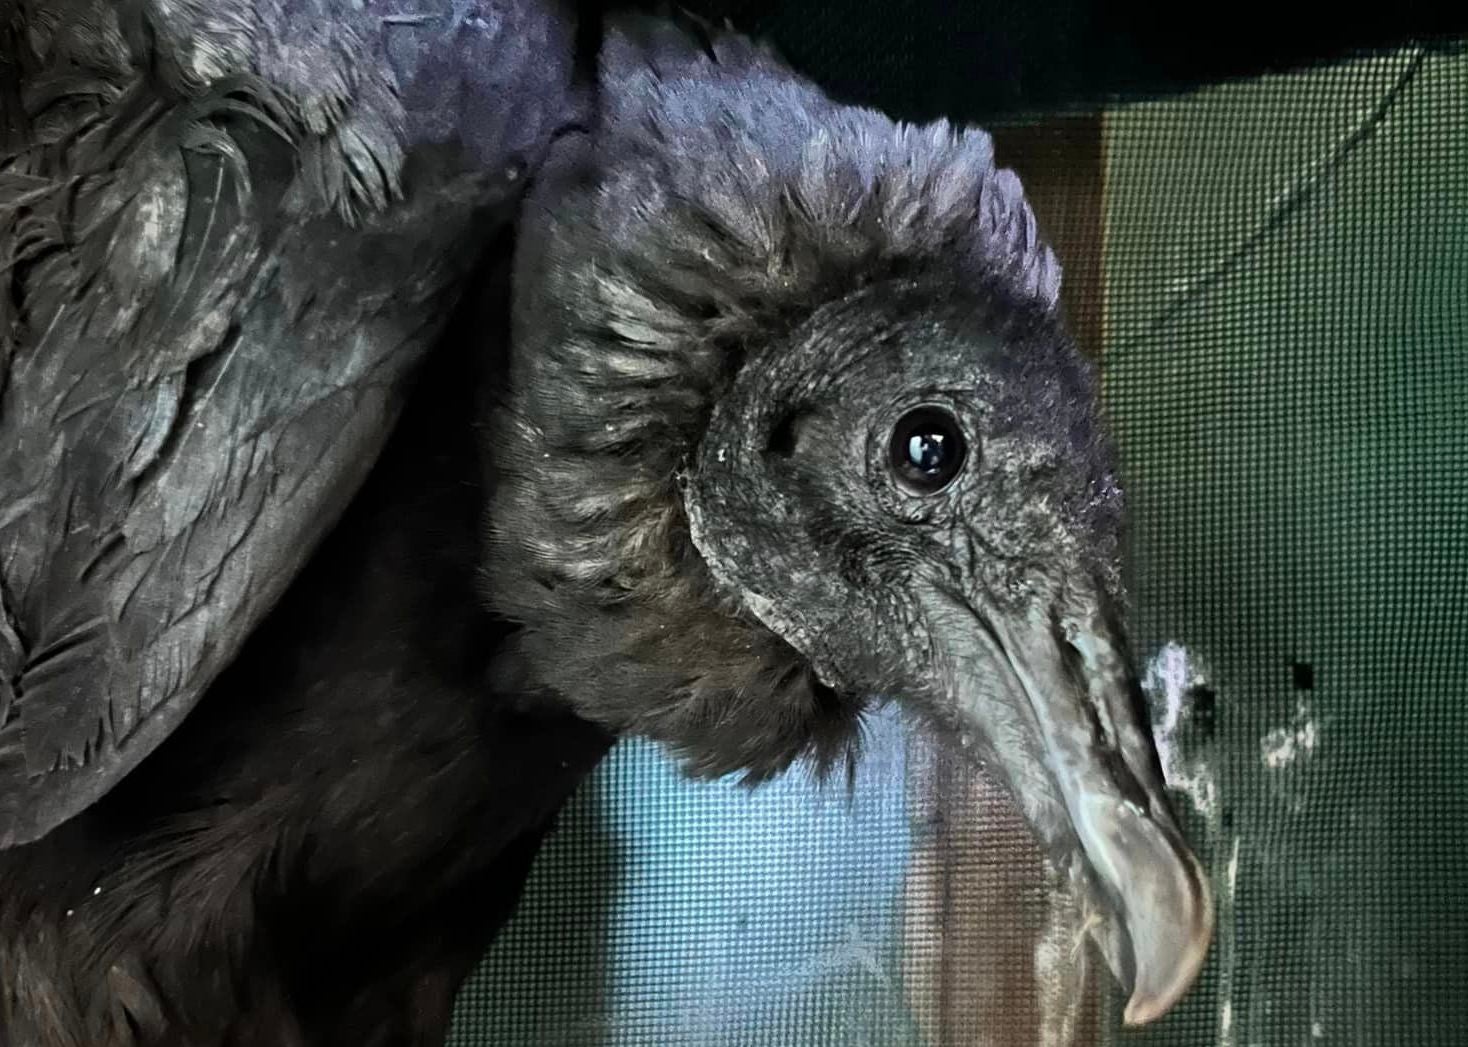 Dumpster-diving vultures in Connecticut became intoxicated